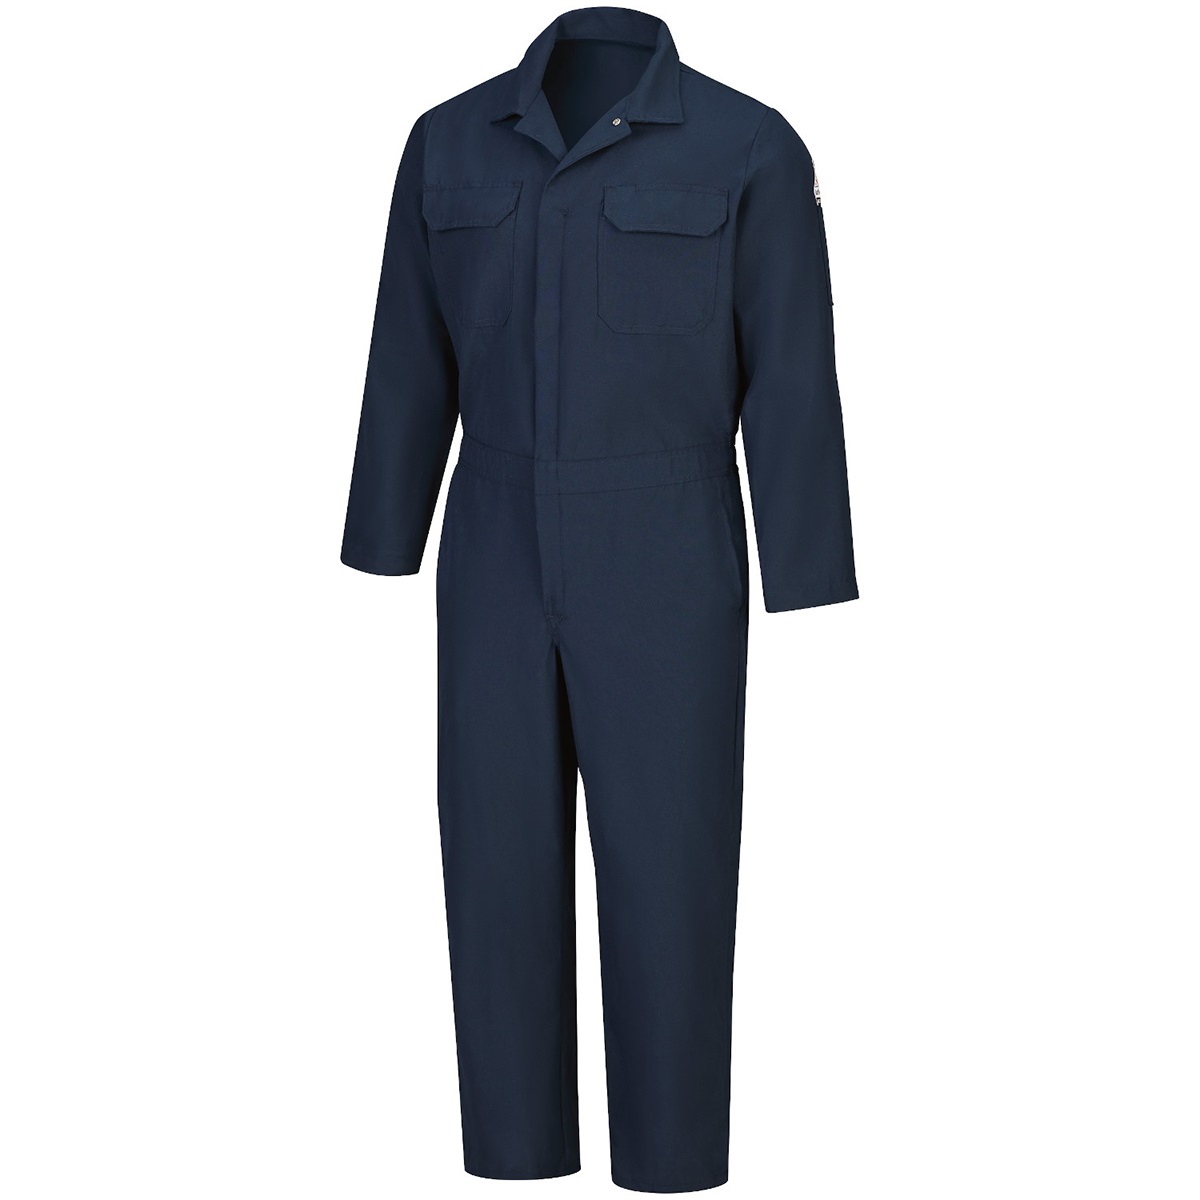 FR Deluxe Coverall in 7oz EXCEL FR ComforTouch Blend